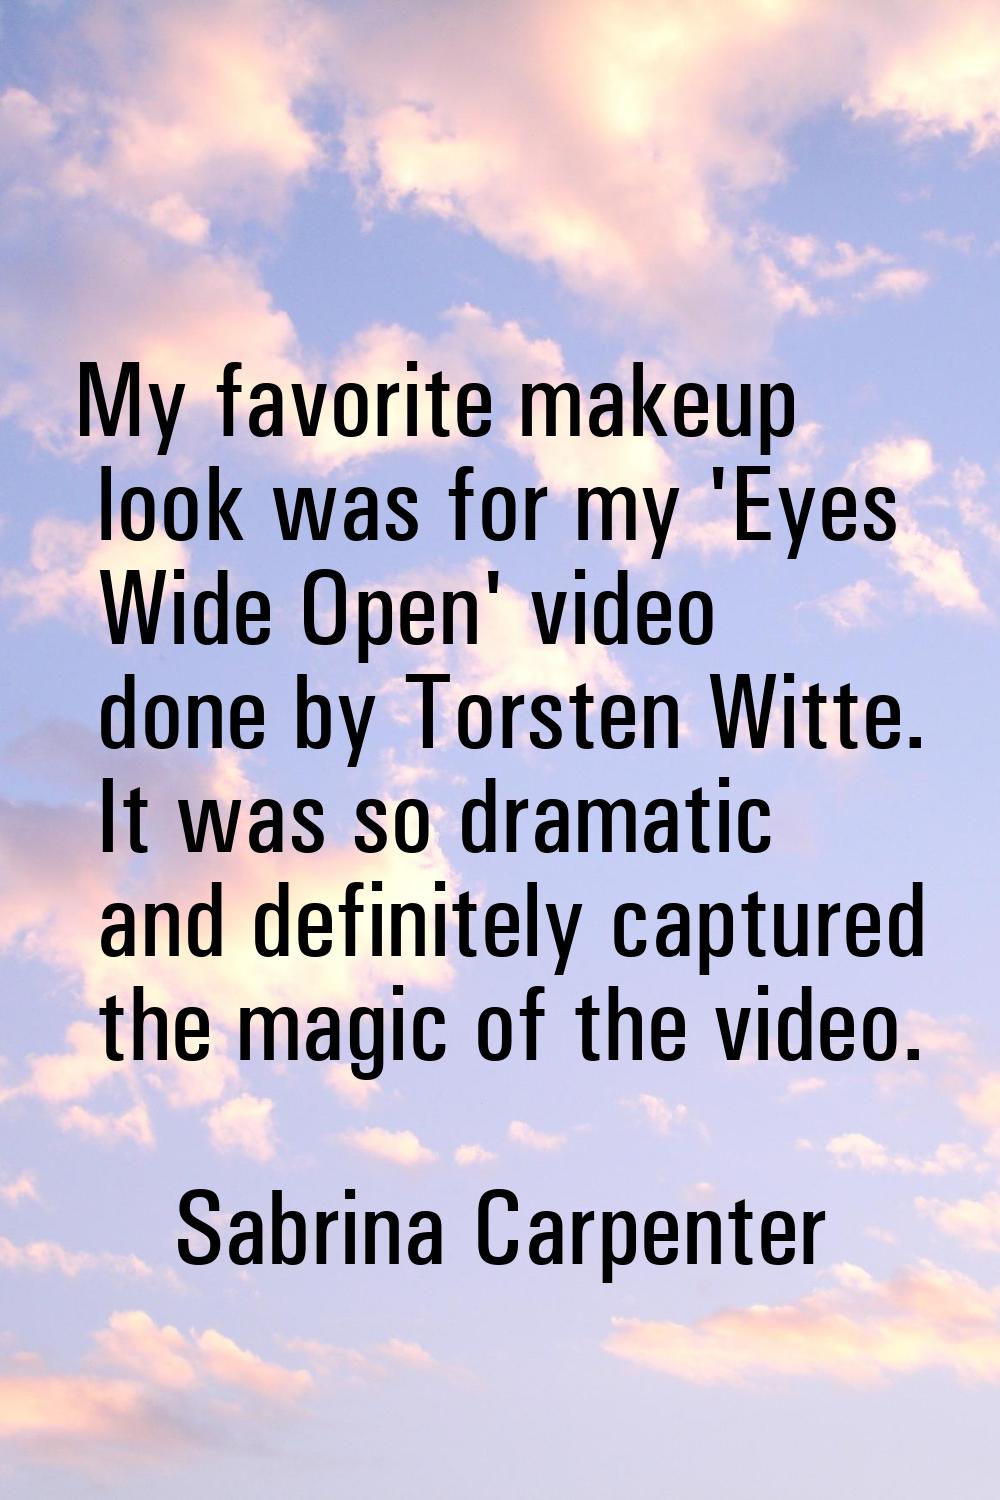 My favorite makeup look was for my 'Eyes Wide Open' video done by Torsten Witte. It was so dramatic